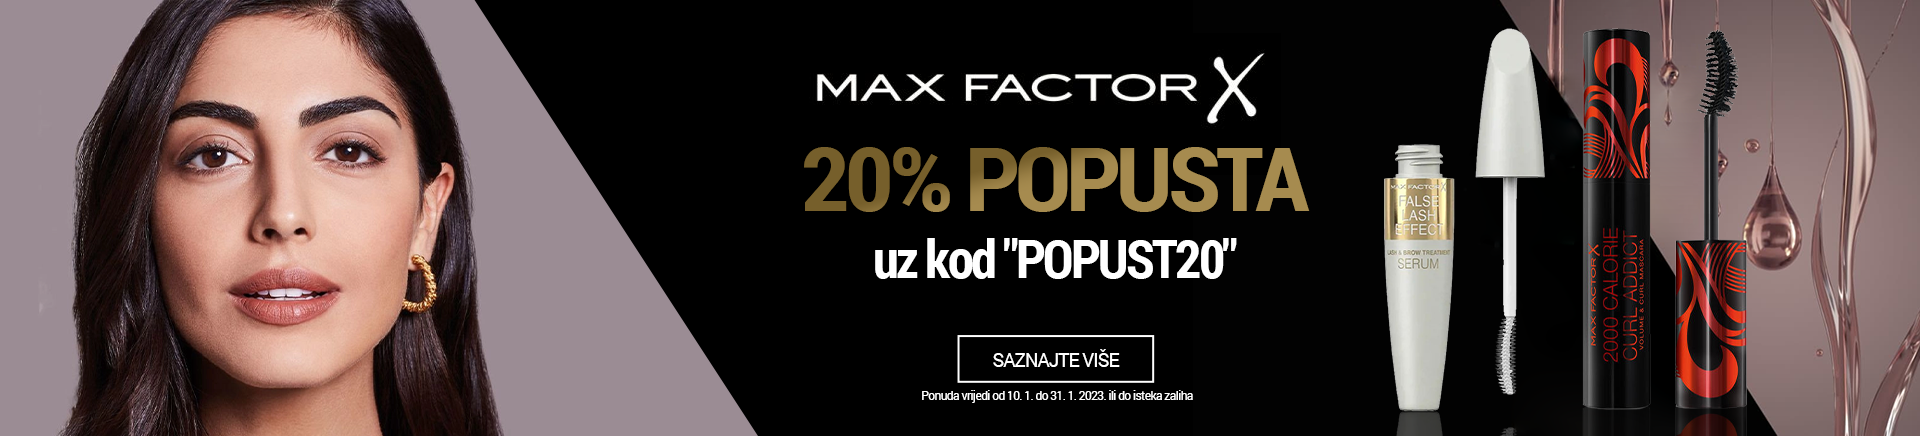 HR Max Factor s popustom MOBILE 380 X 436.png